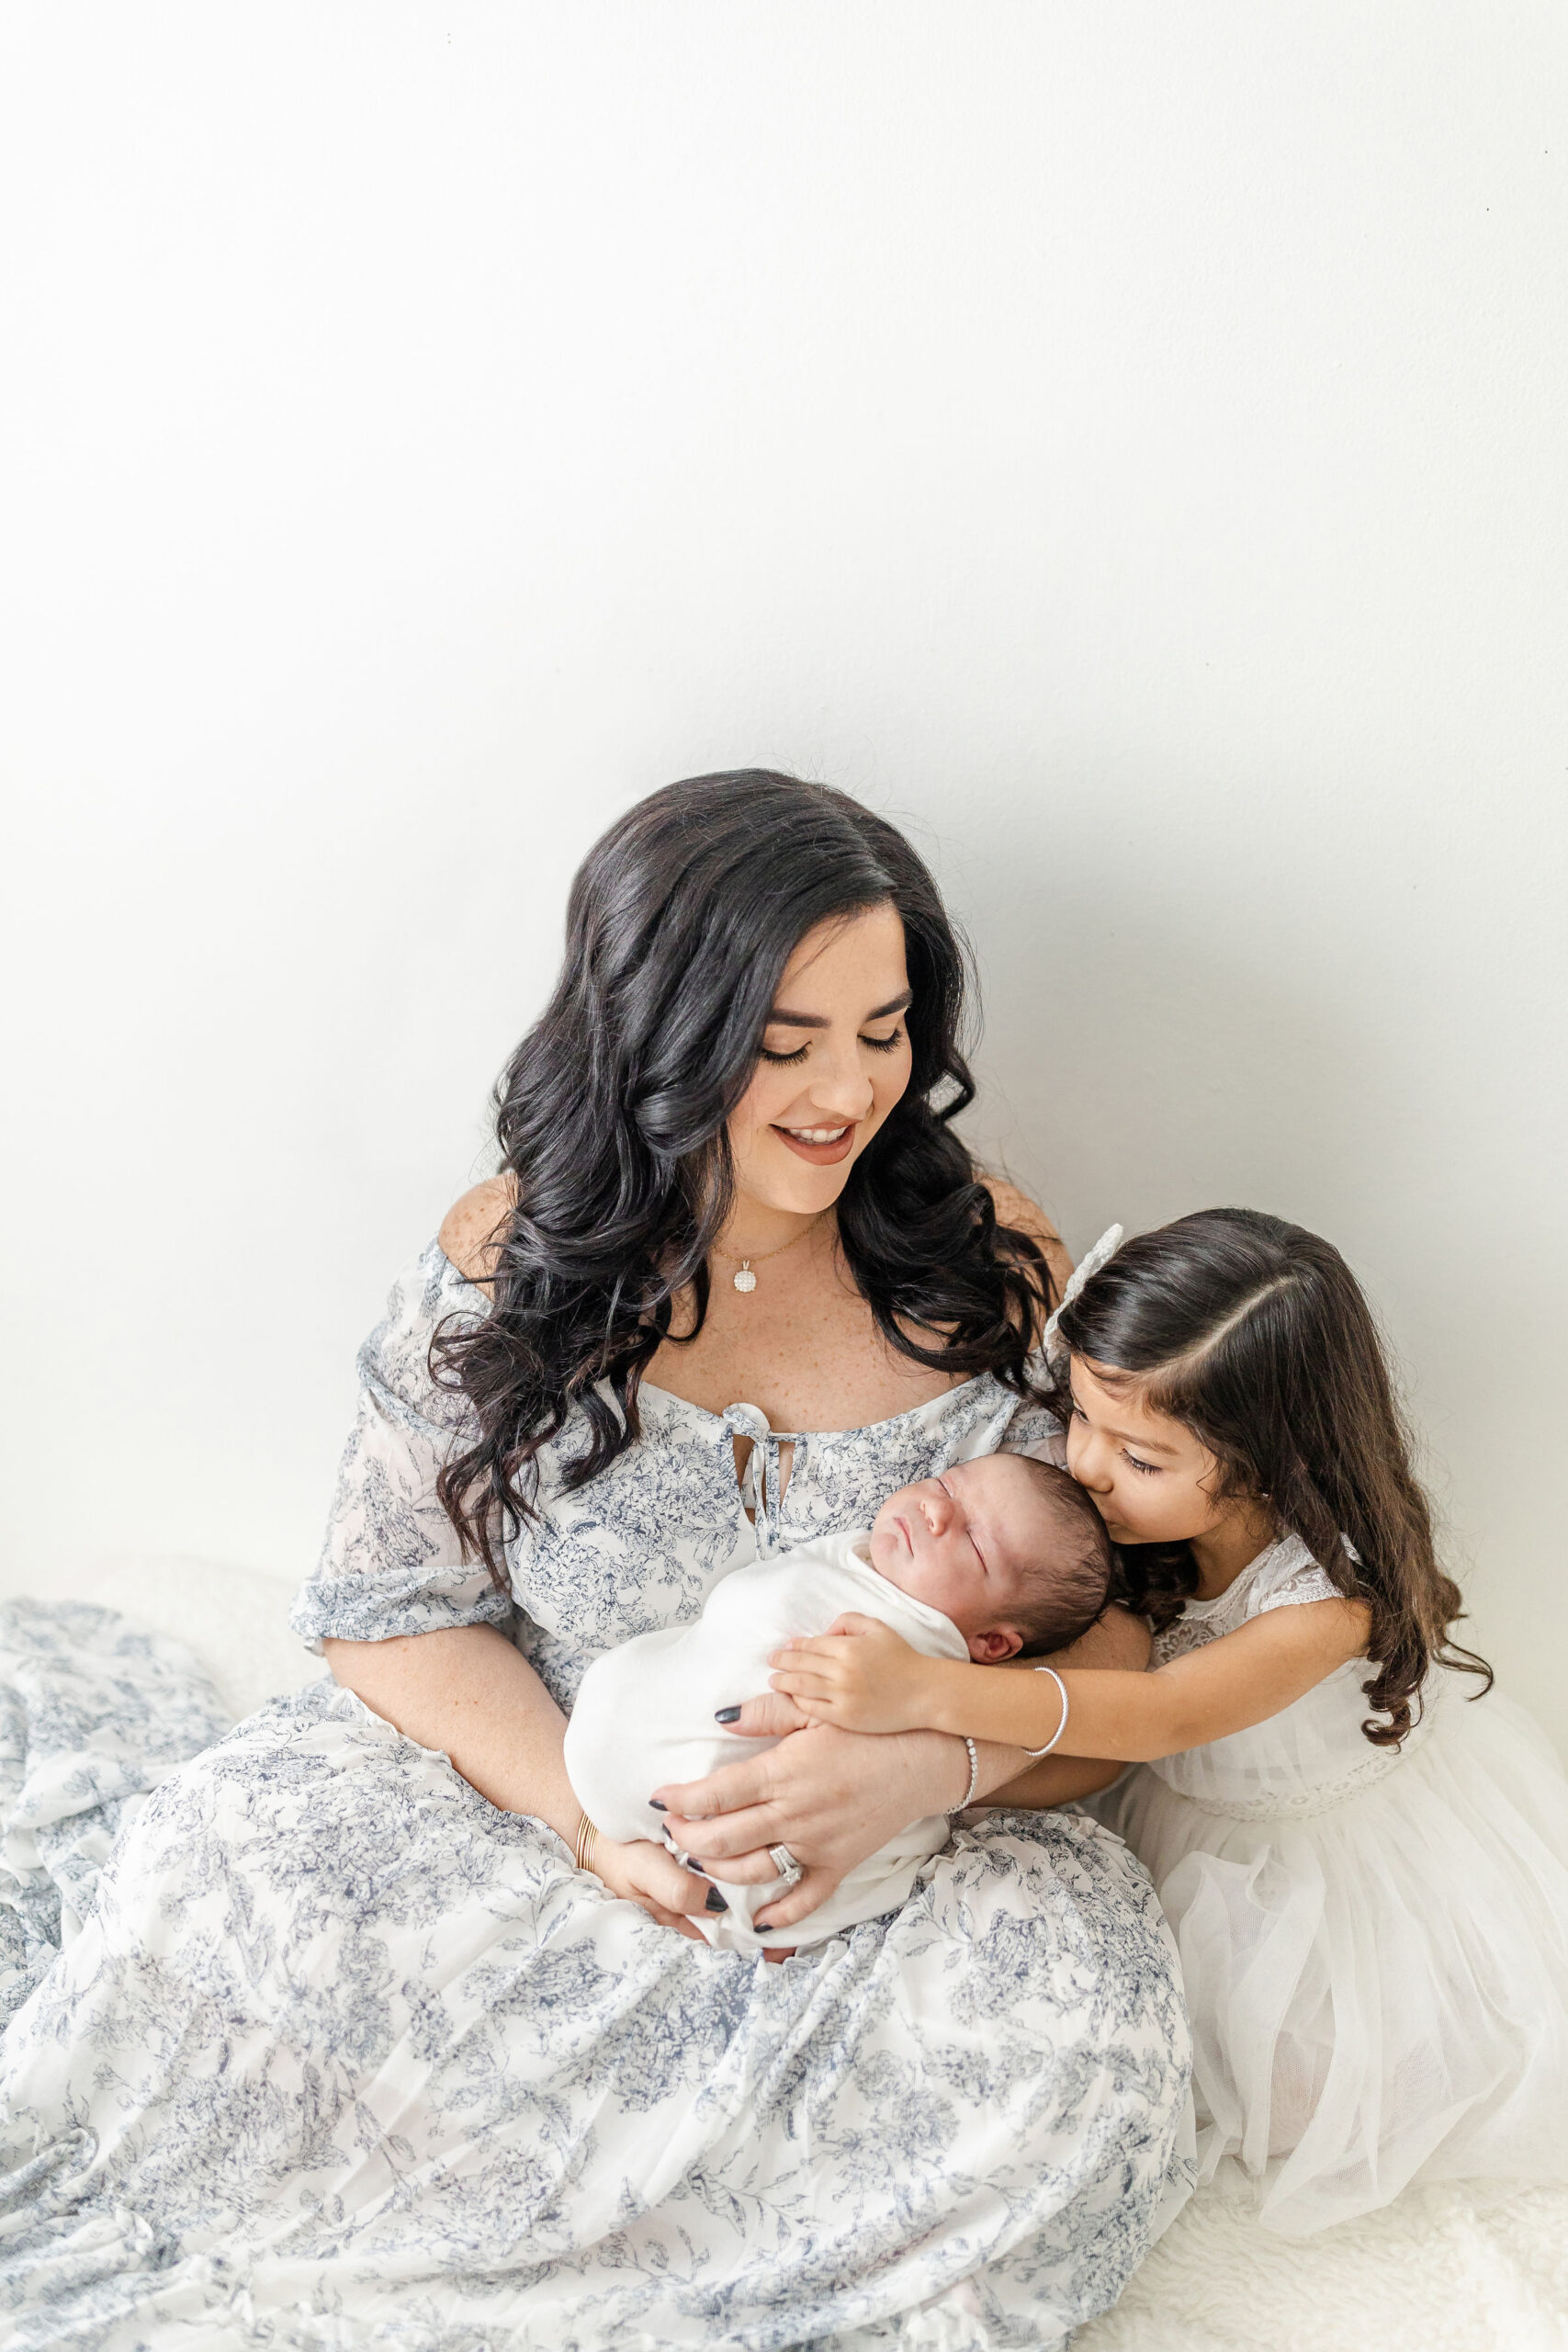 A young girl in a white dress kisses the forehead of her newborn sibling in mom's lap